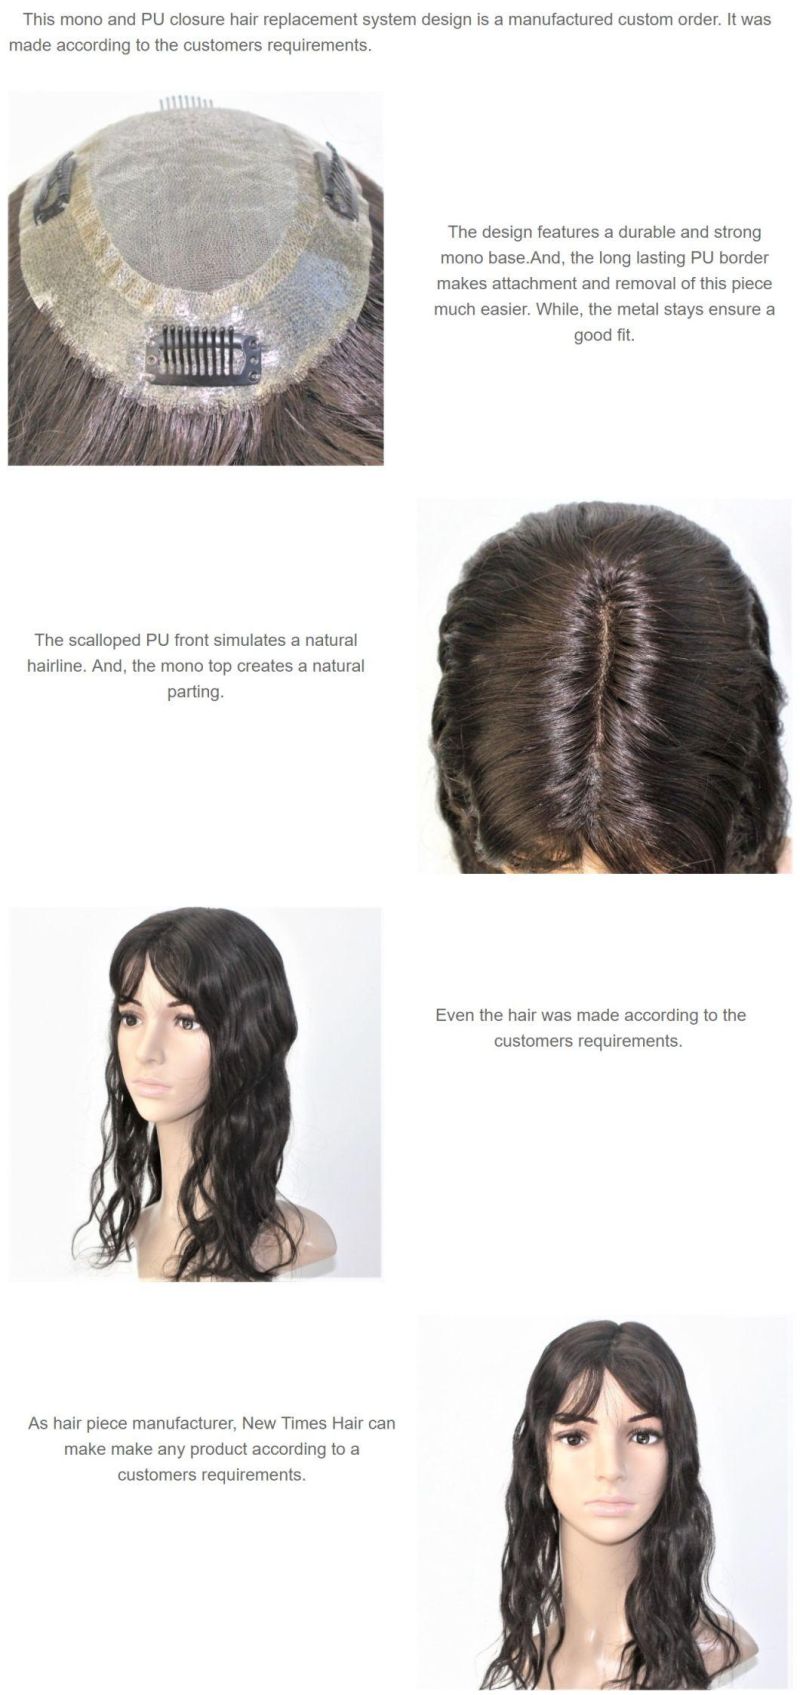 Custom Women′s Mono and PU Closure Hair Replacement System